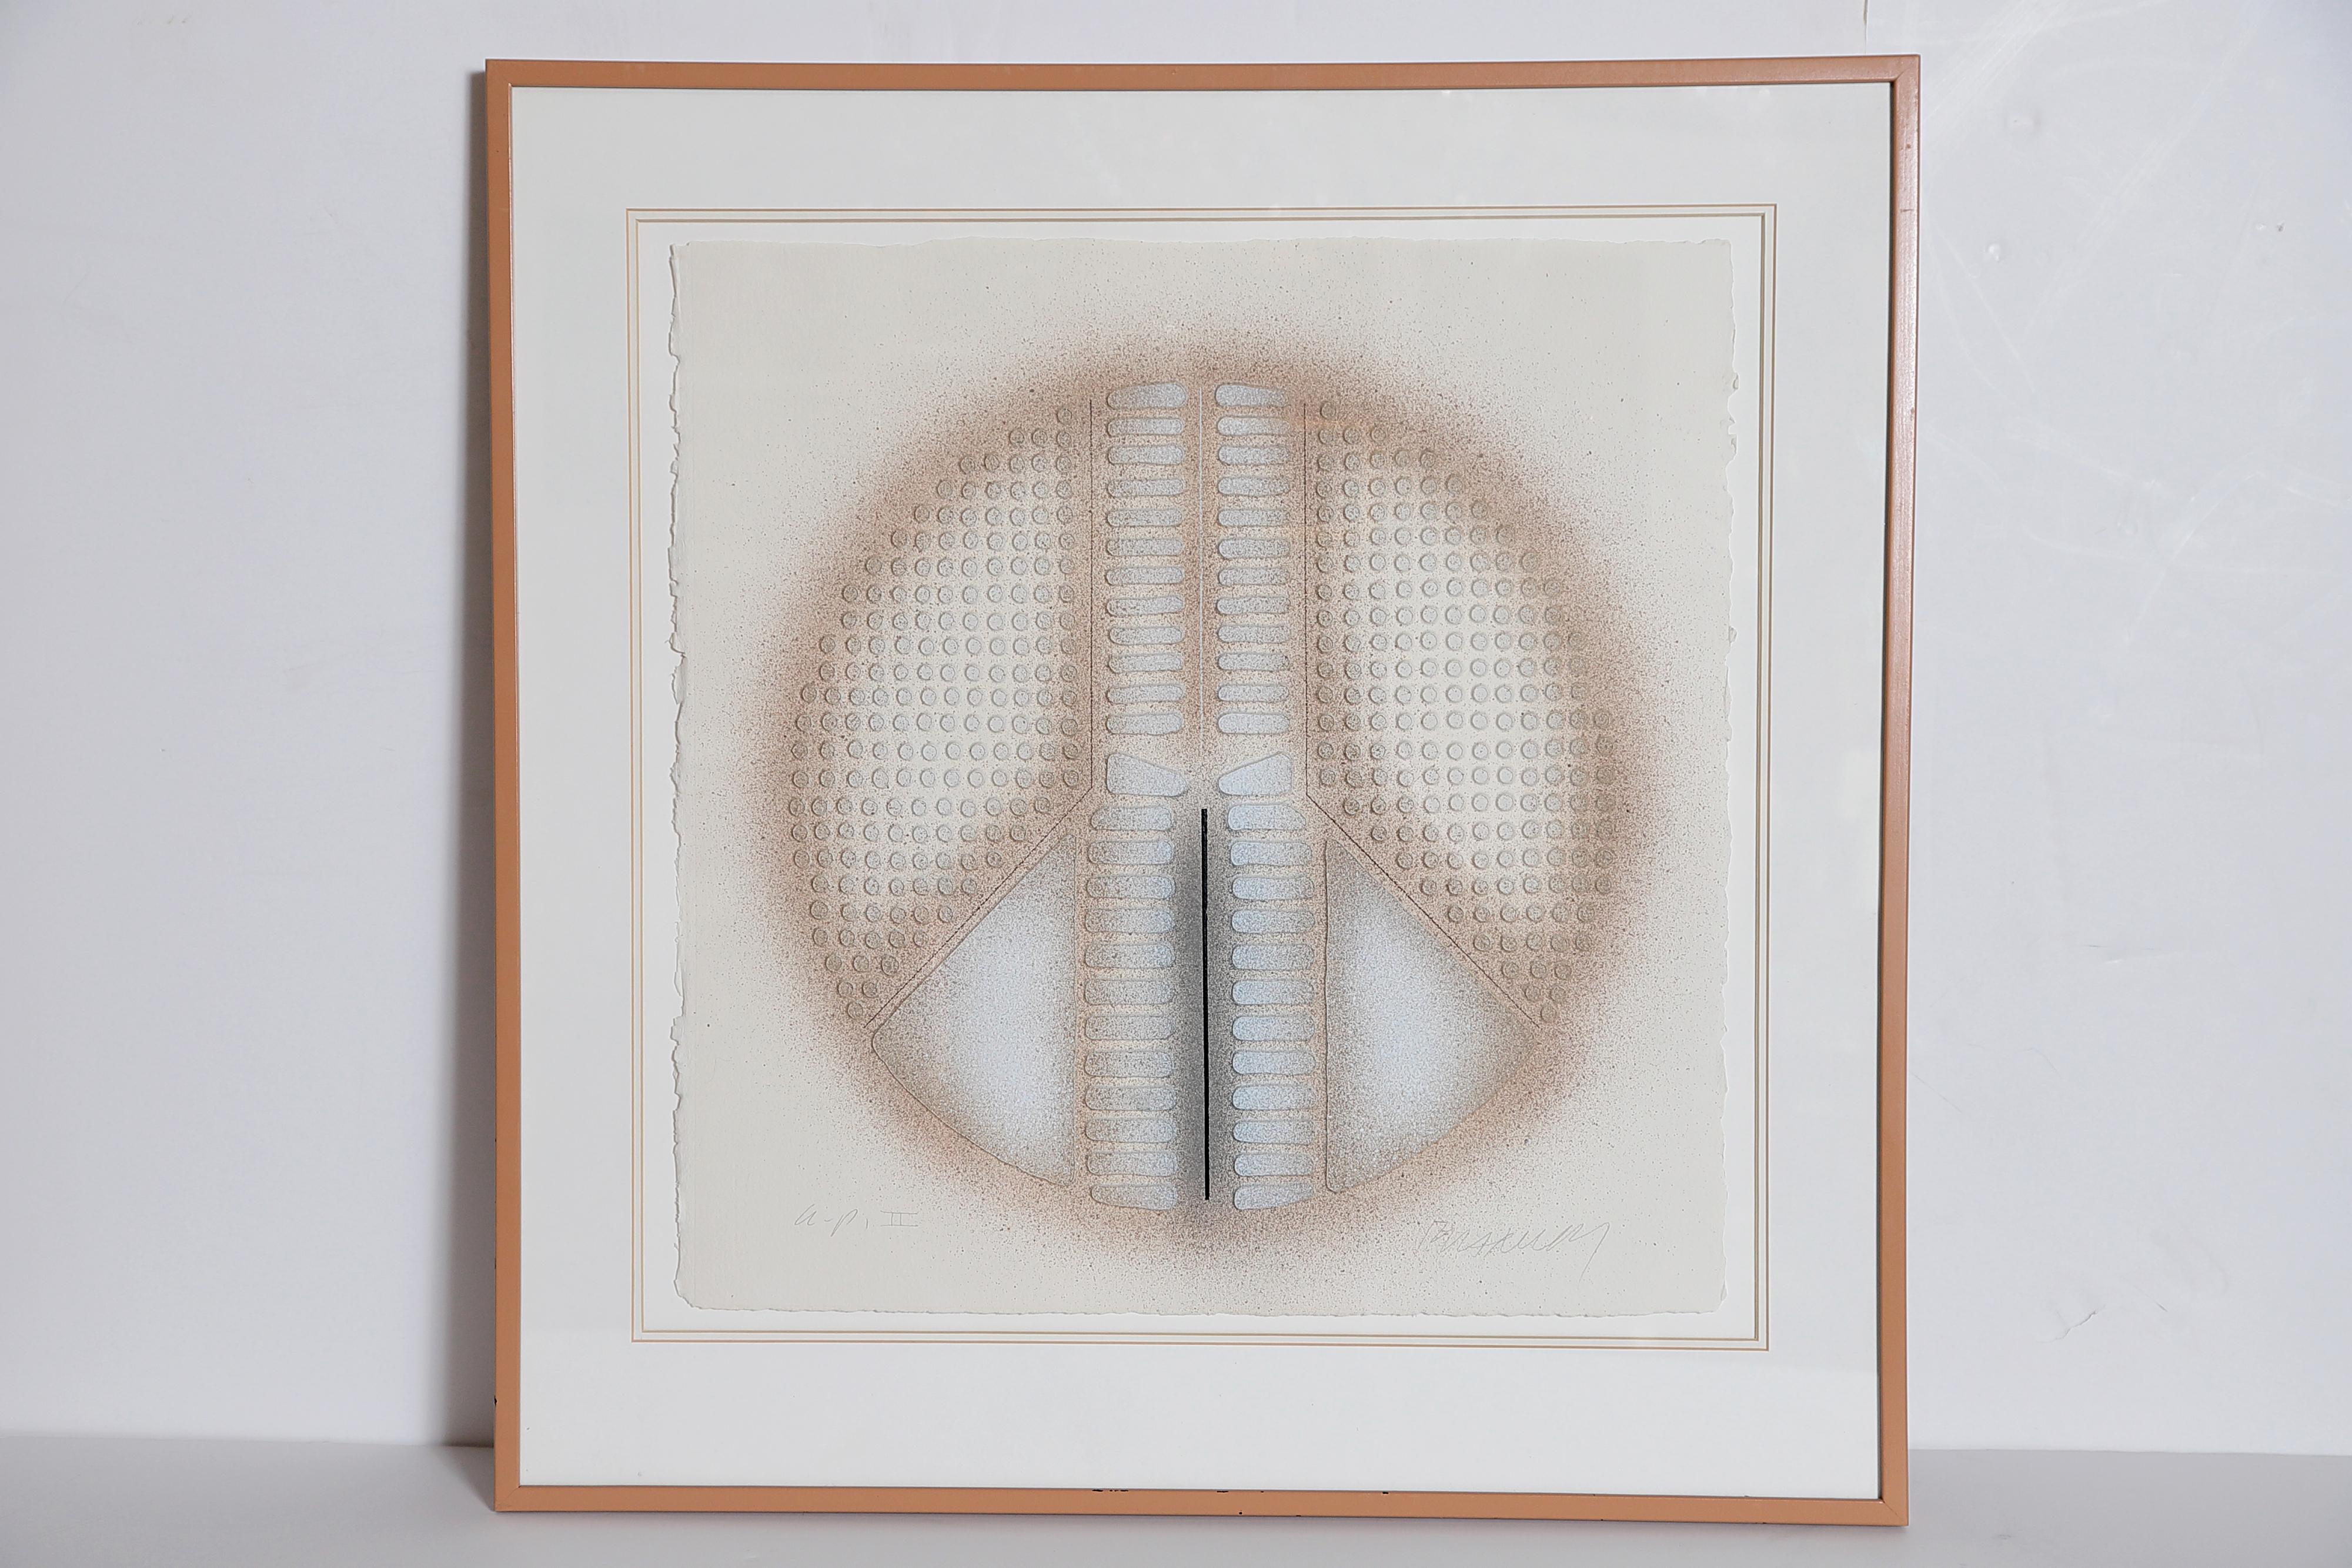 A 1970s Paul Maxwell (1925-2015) textured print (stencil-casting) peace sign sculpture, silver / grays and bronze / browns, earth-tones, framed, artist's proof, marked AP lower left, signed lower right

23